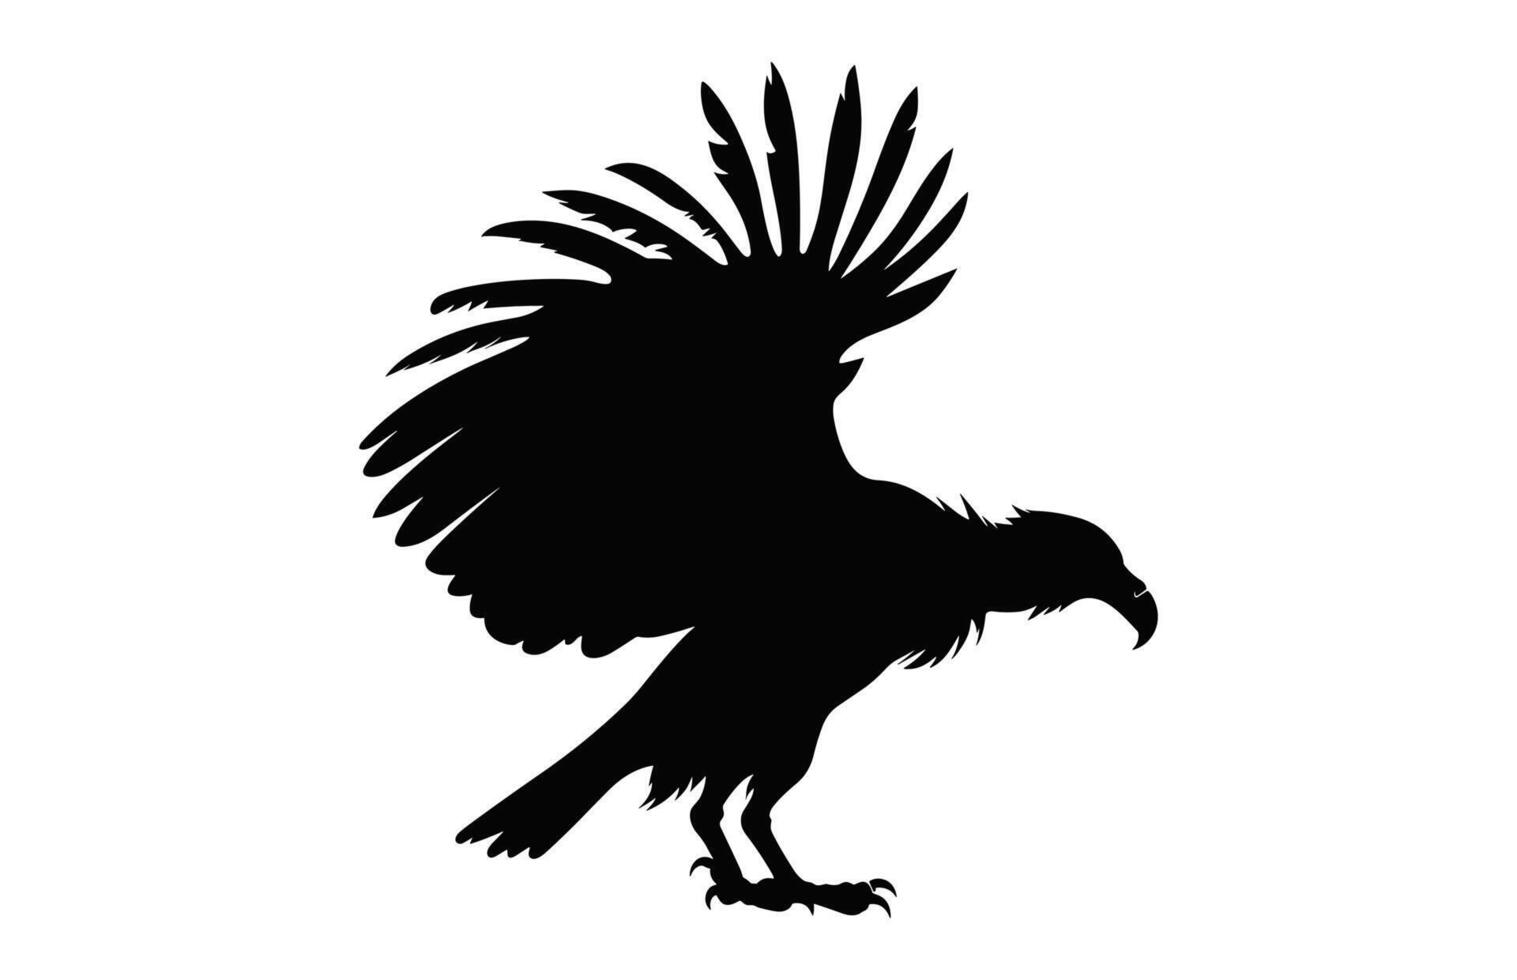 Flying Griffon Vulture Beak black vector, Big Griffon Vulture silhouette isolated on a white background vector